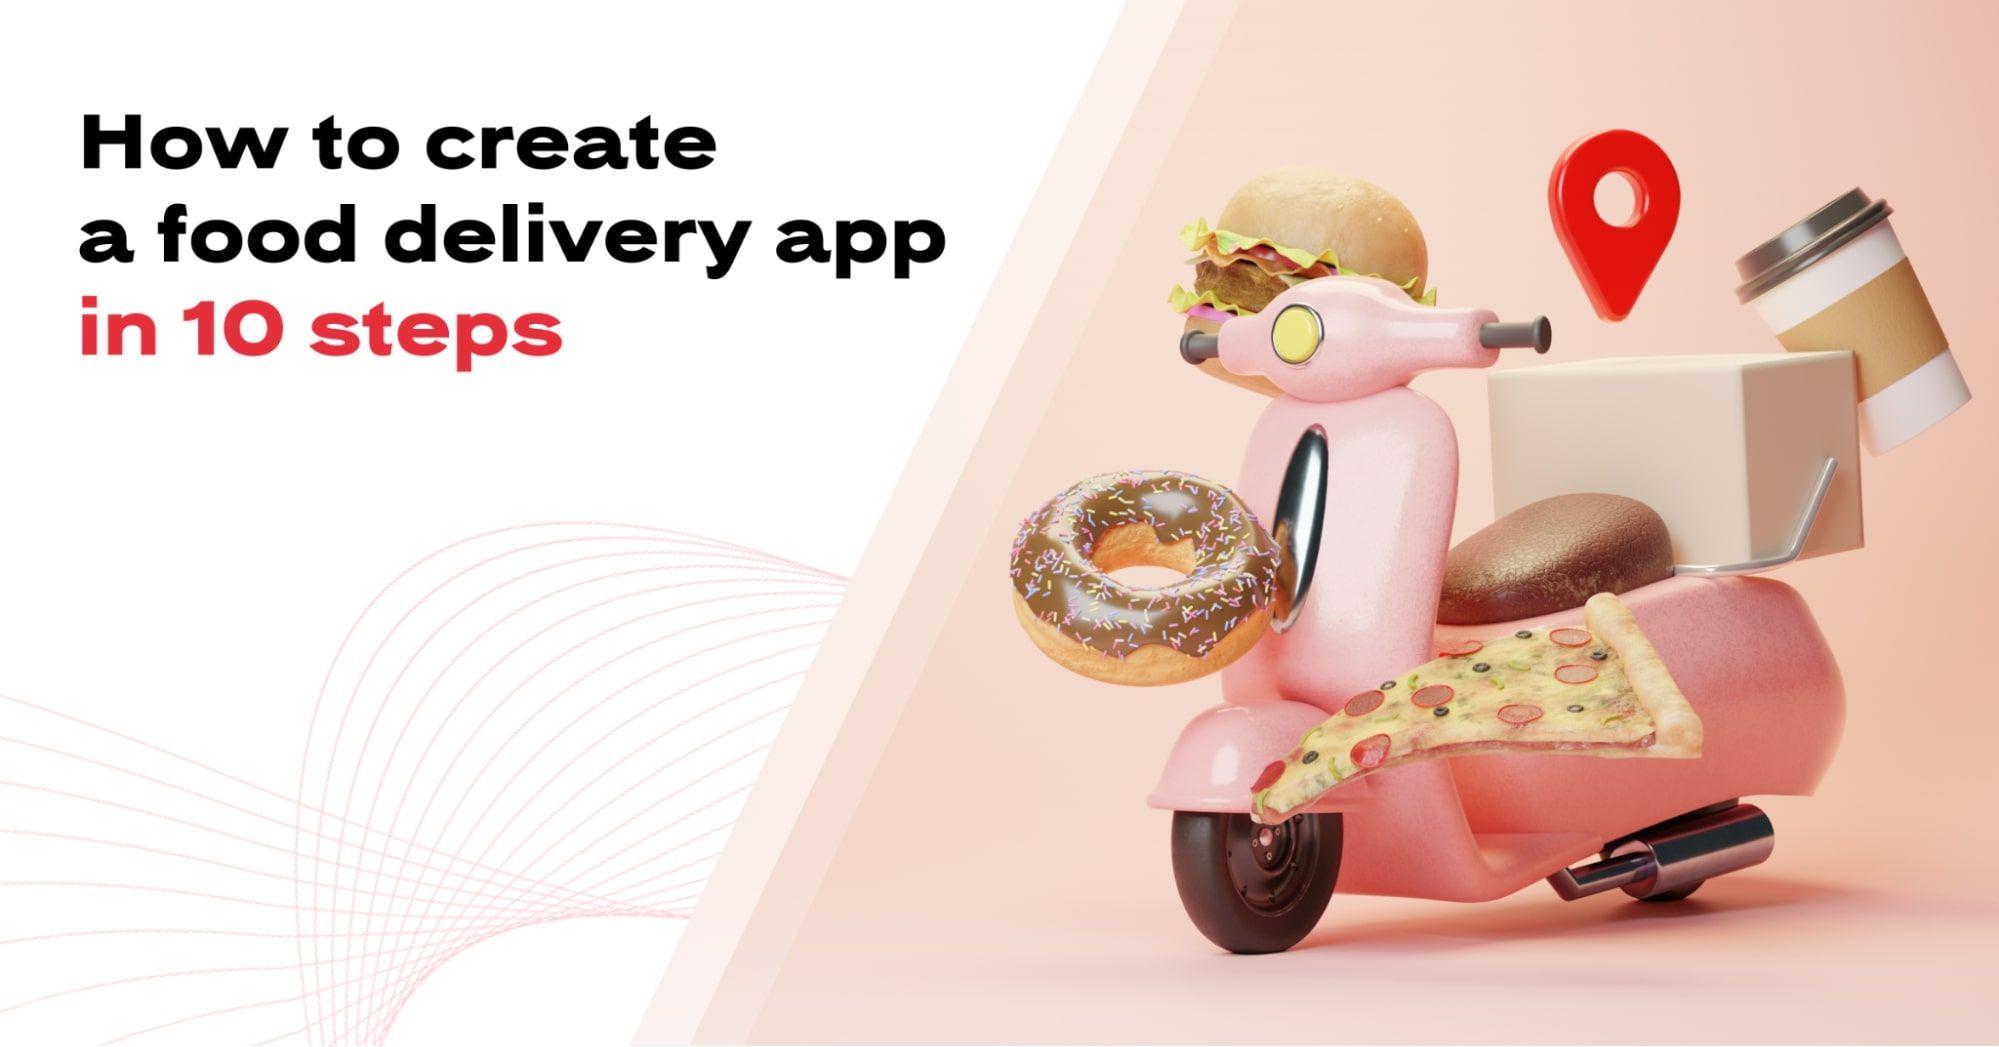 How to create a food delivery app in 10 steps